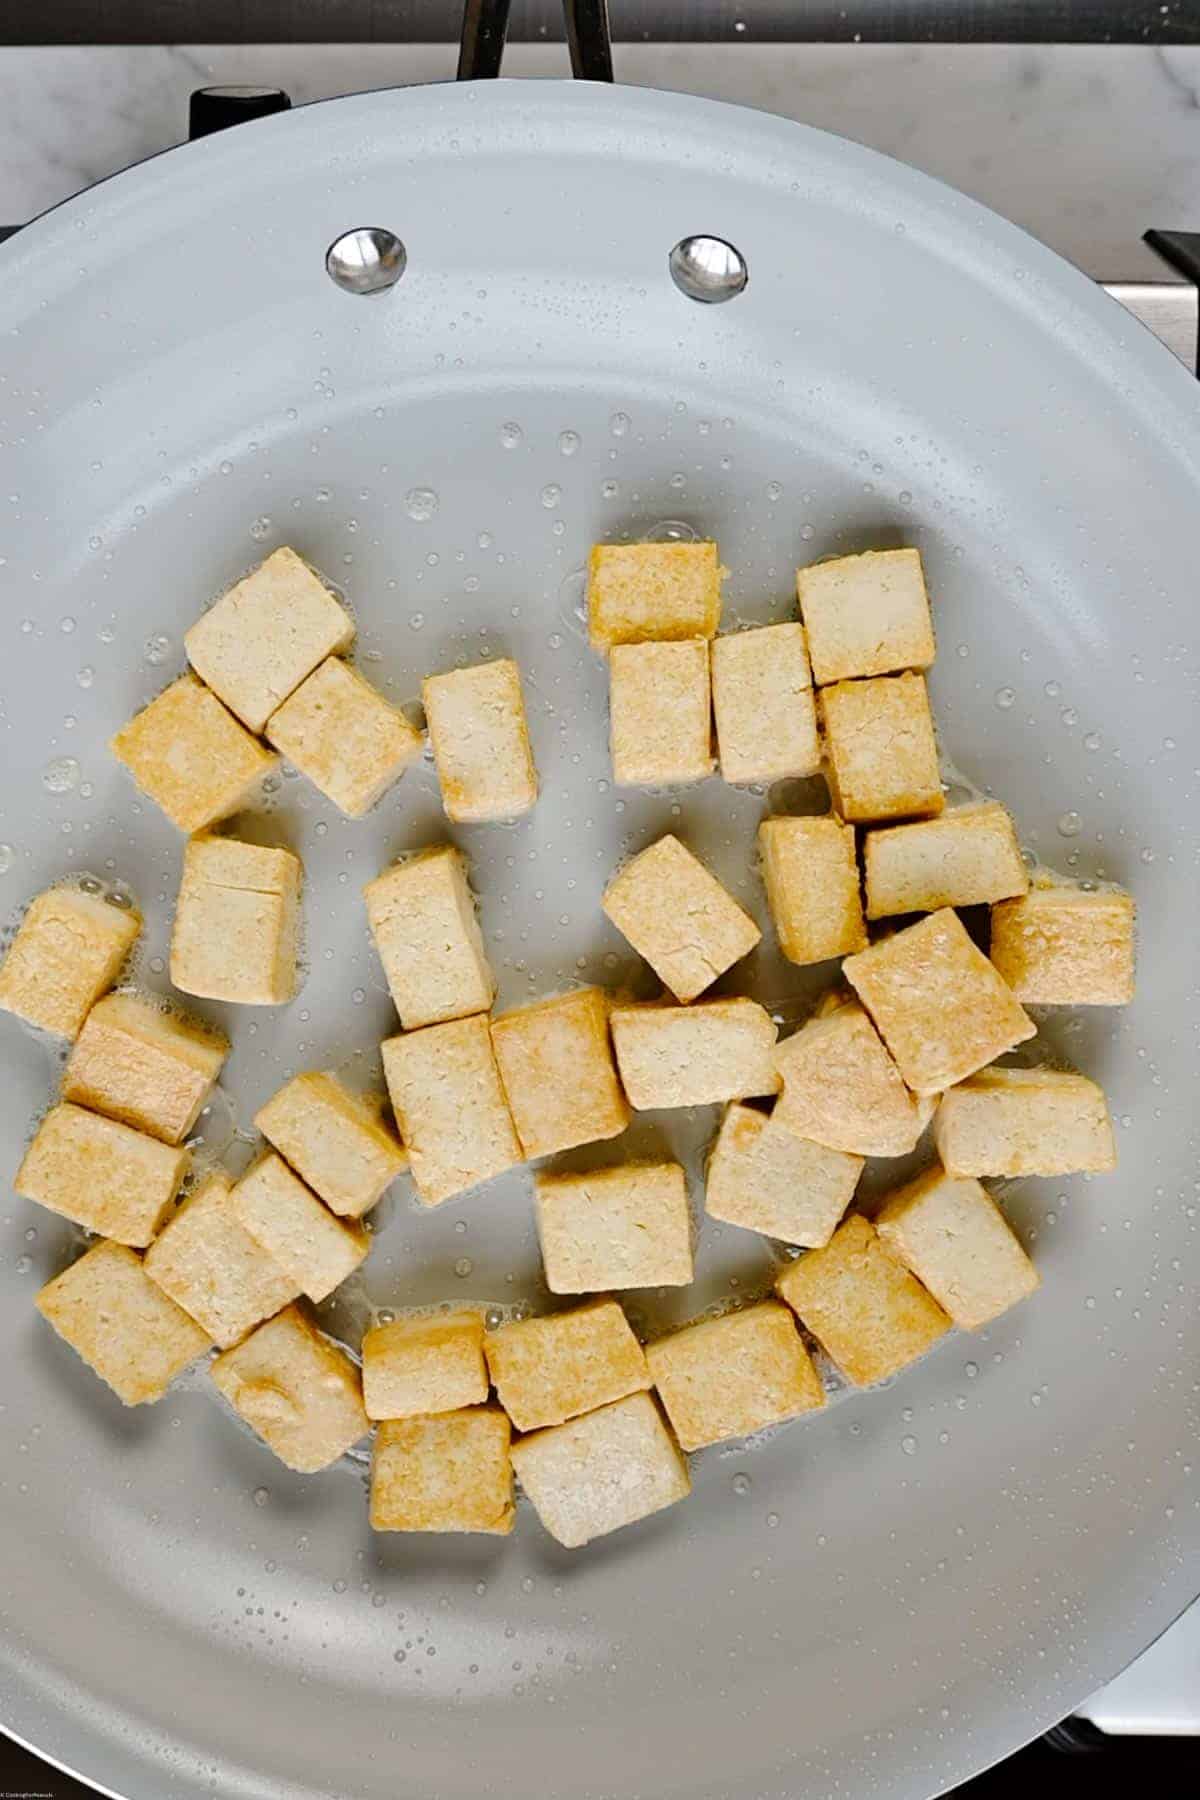 Tofu cubes pan-frying in a large nonstick skillet.